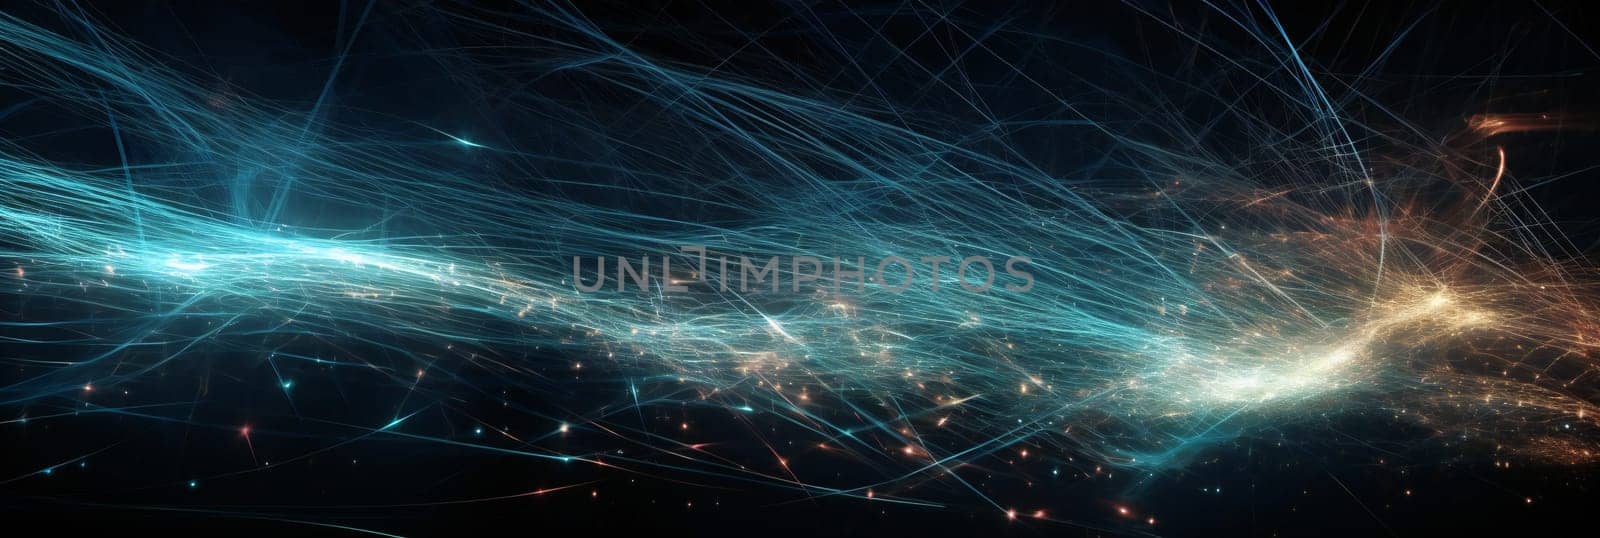 Blue light streak, fiber optic, speed line, futuristic background for 5g or 6g technology wireless data transmission, high-speed internet in abstract. internet network concept.